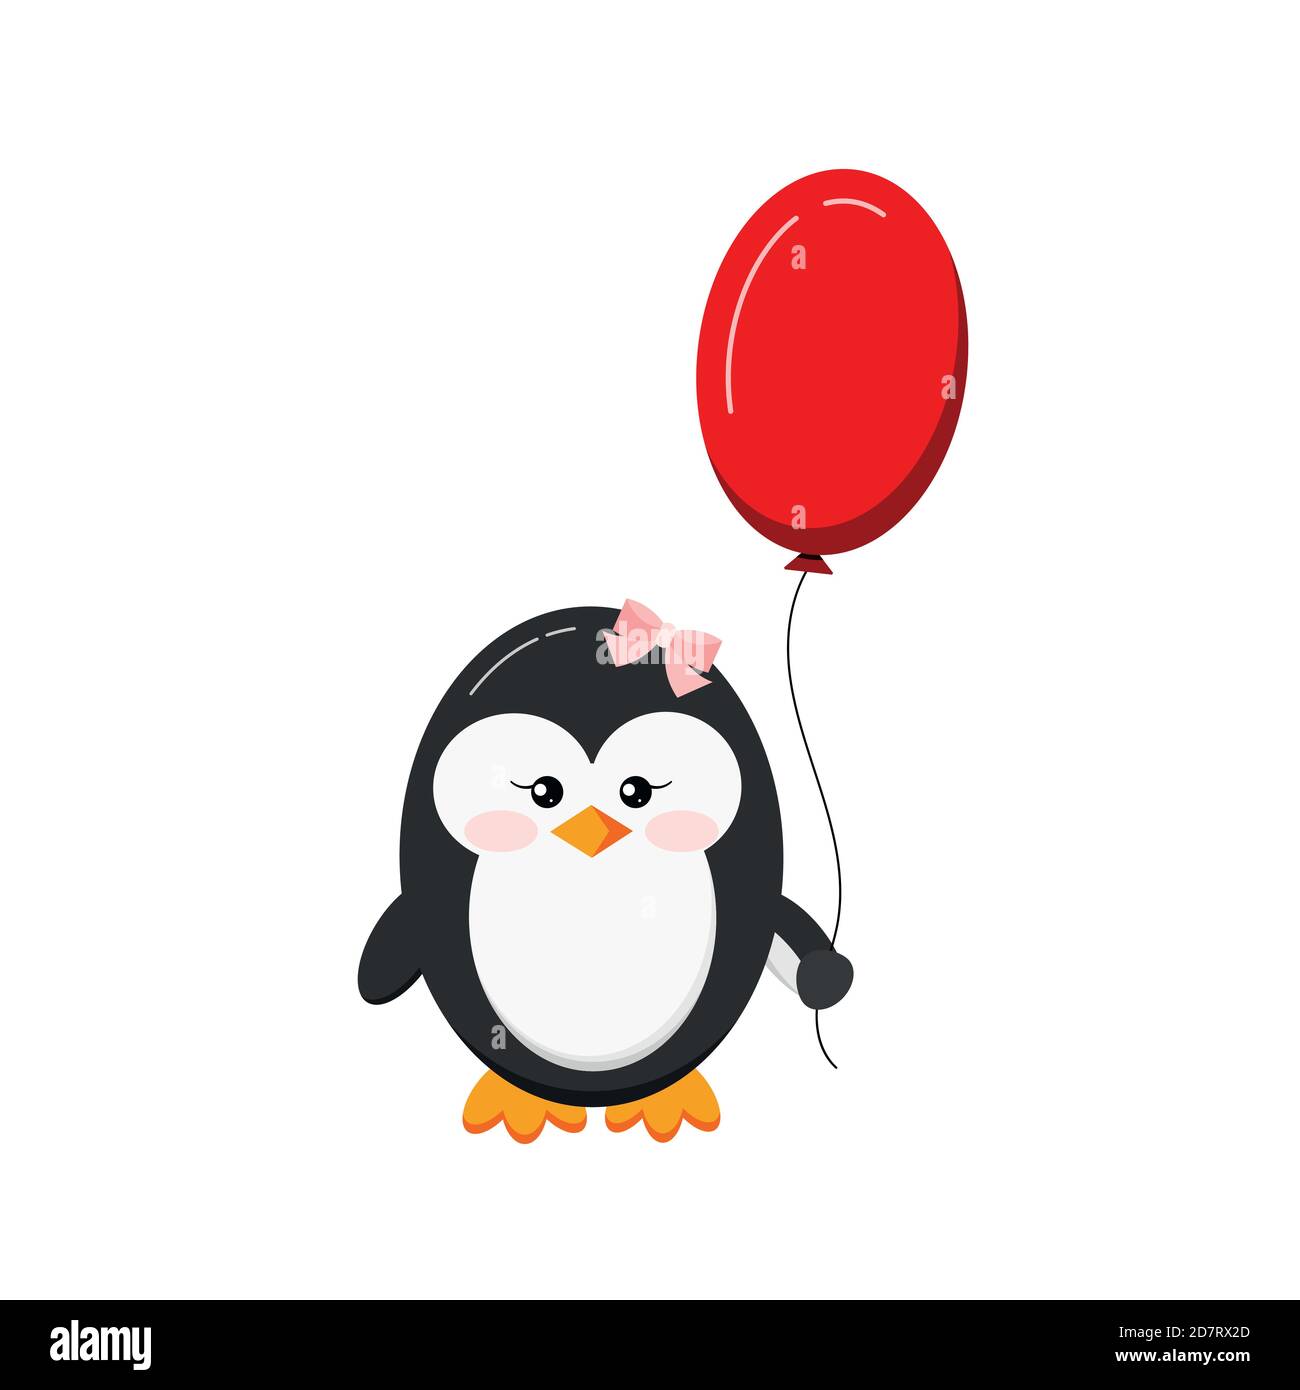 https://c8.alamy.com/comp/2D7RX2D/cute-baby-penguin-holding-balloon-isolated-on-white-background-2D7RX2D.jpg